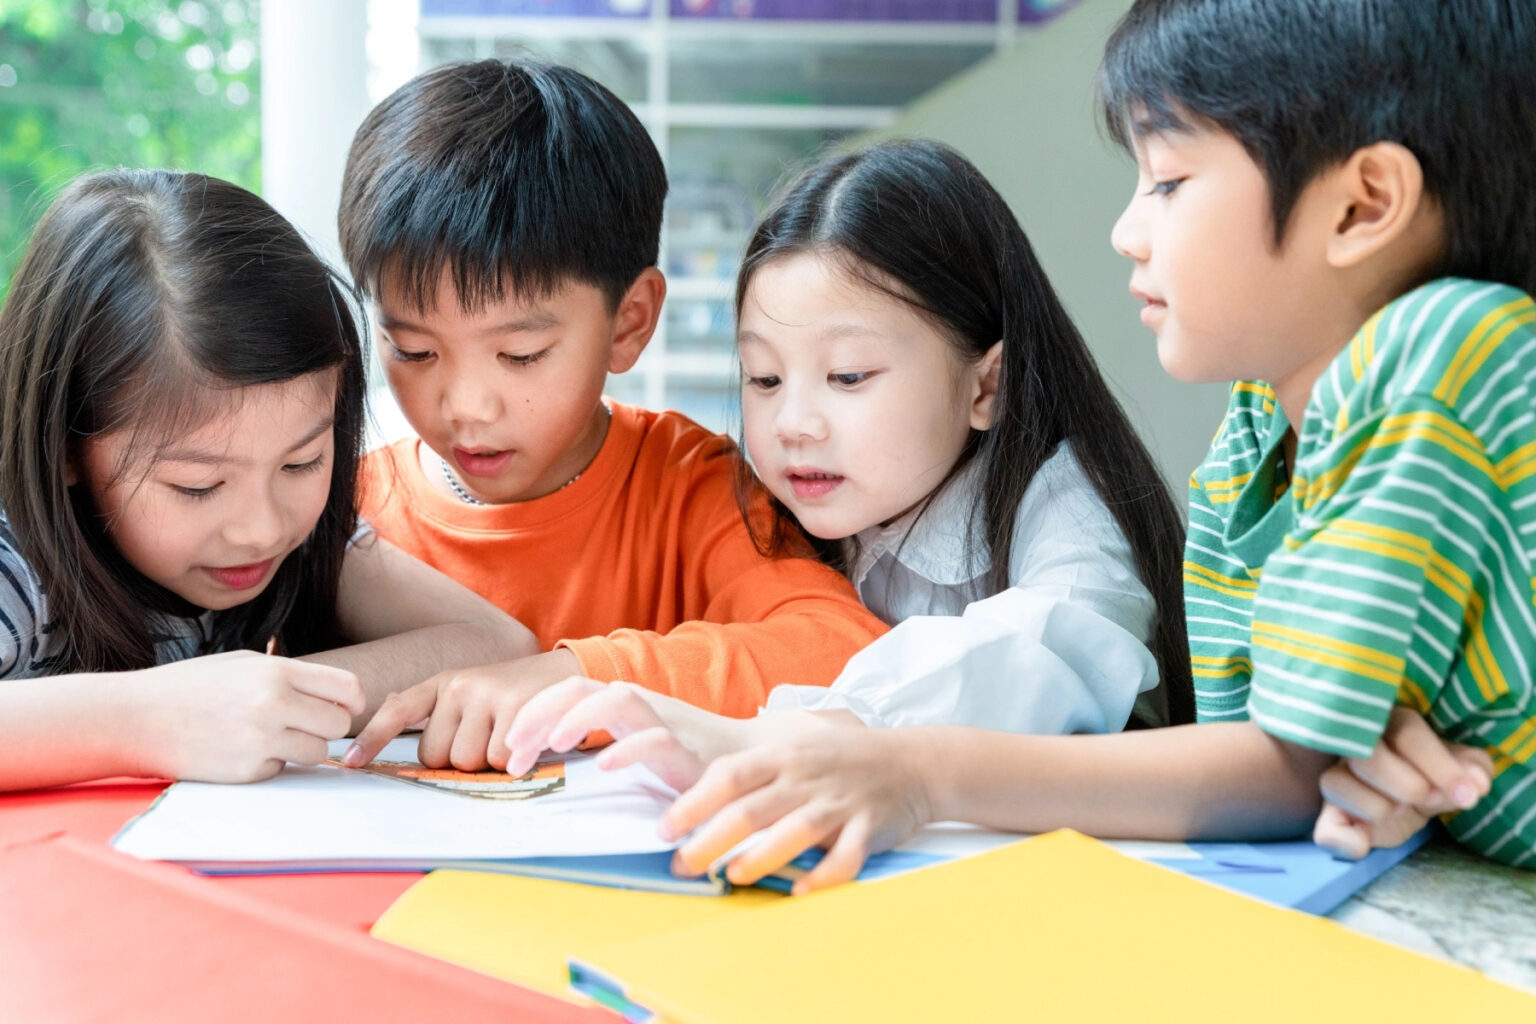 Four Asian children standing around a colorful table look down and reach for a paper